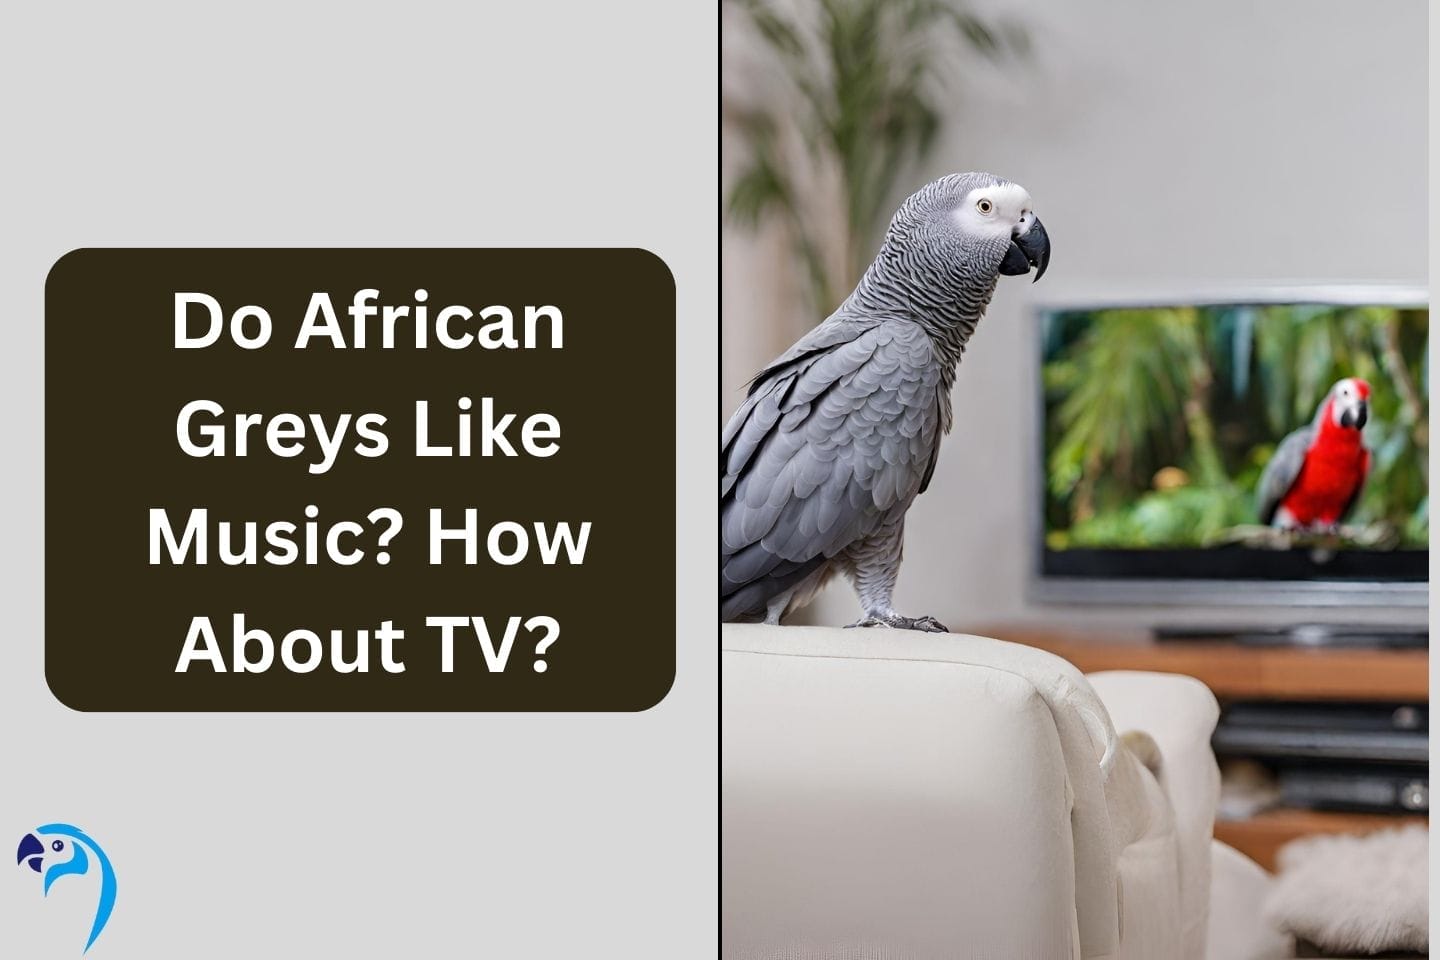 Do African Greys Like Music? How About TV?